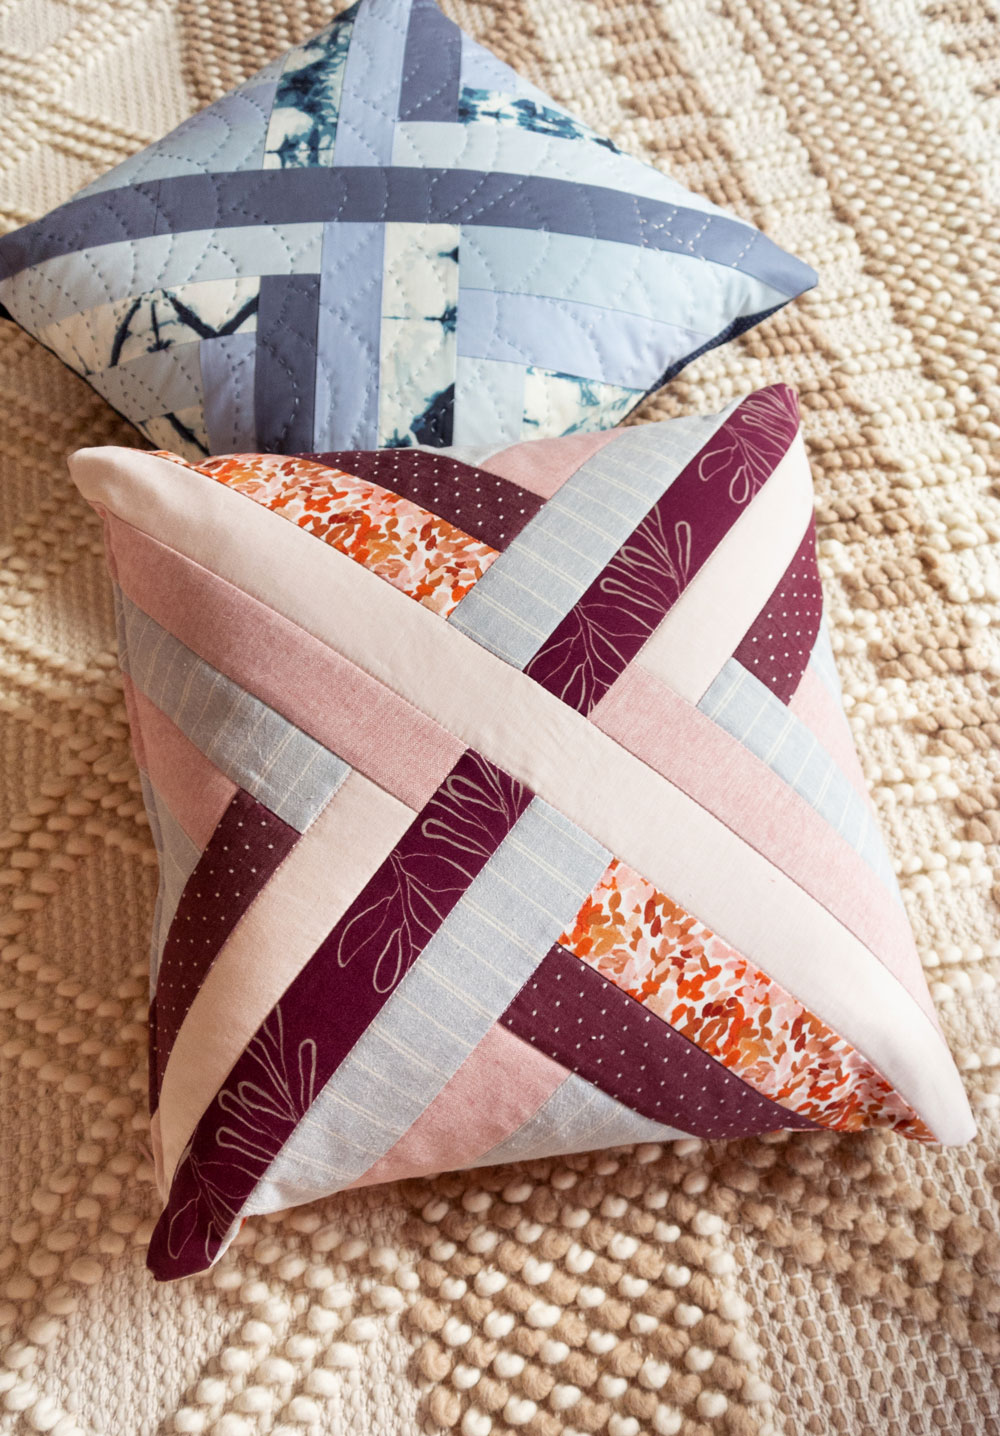 3 fun and fresh quilted pillow patterns for a modern look. Easy to follow patterns that are fat quarter friendly or use up scraps!